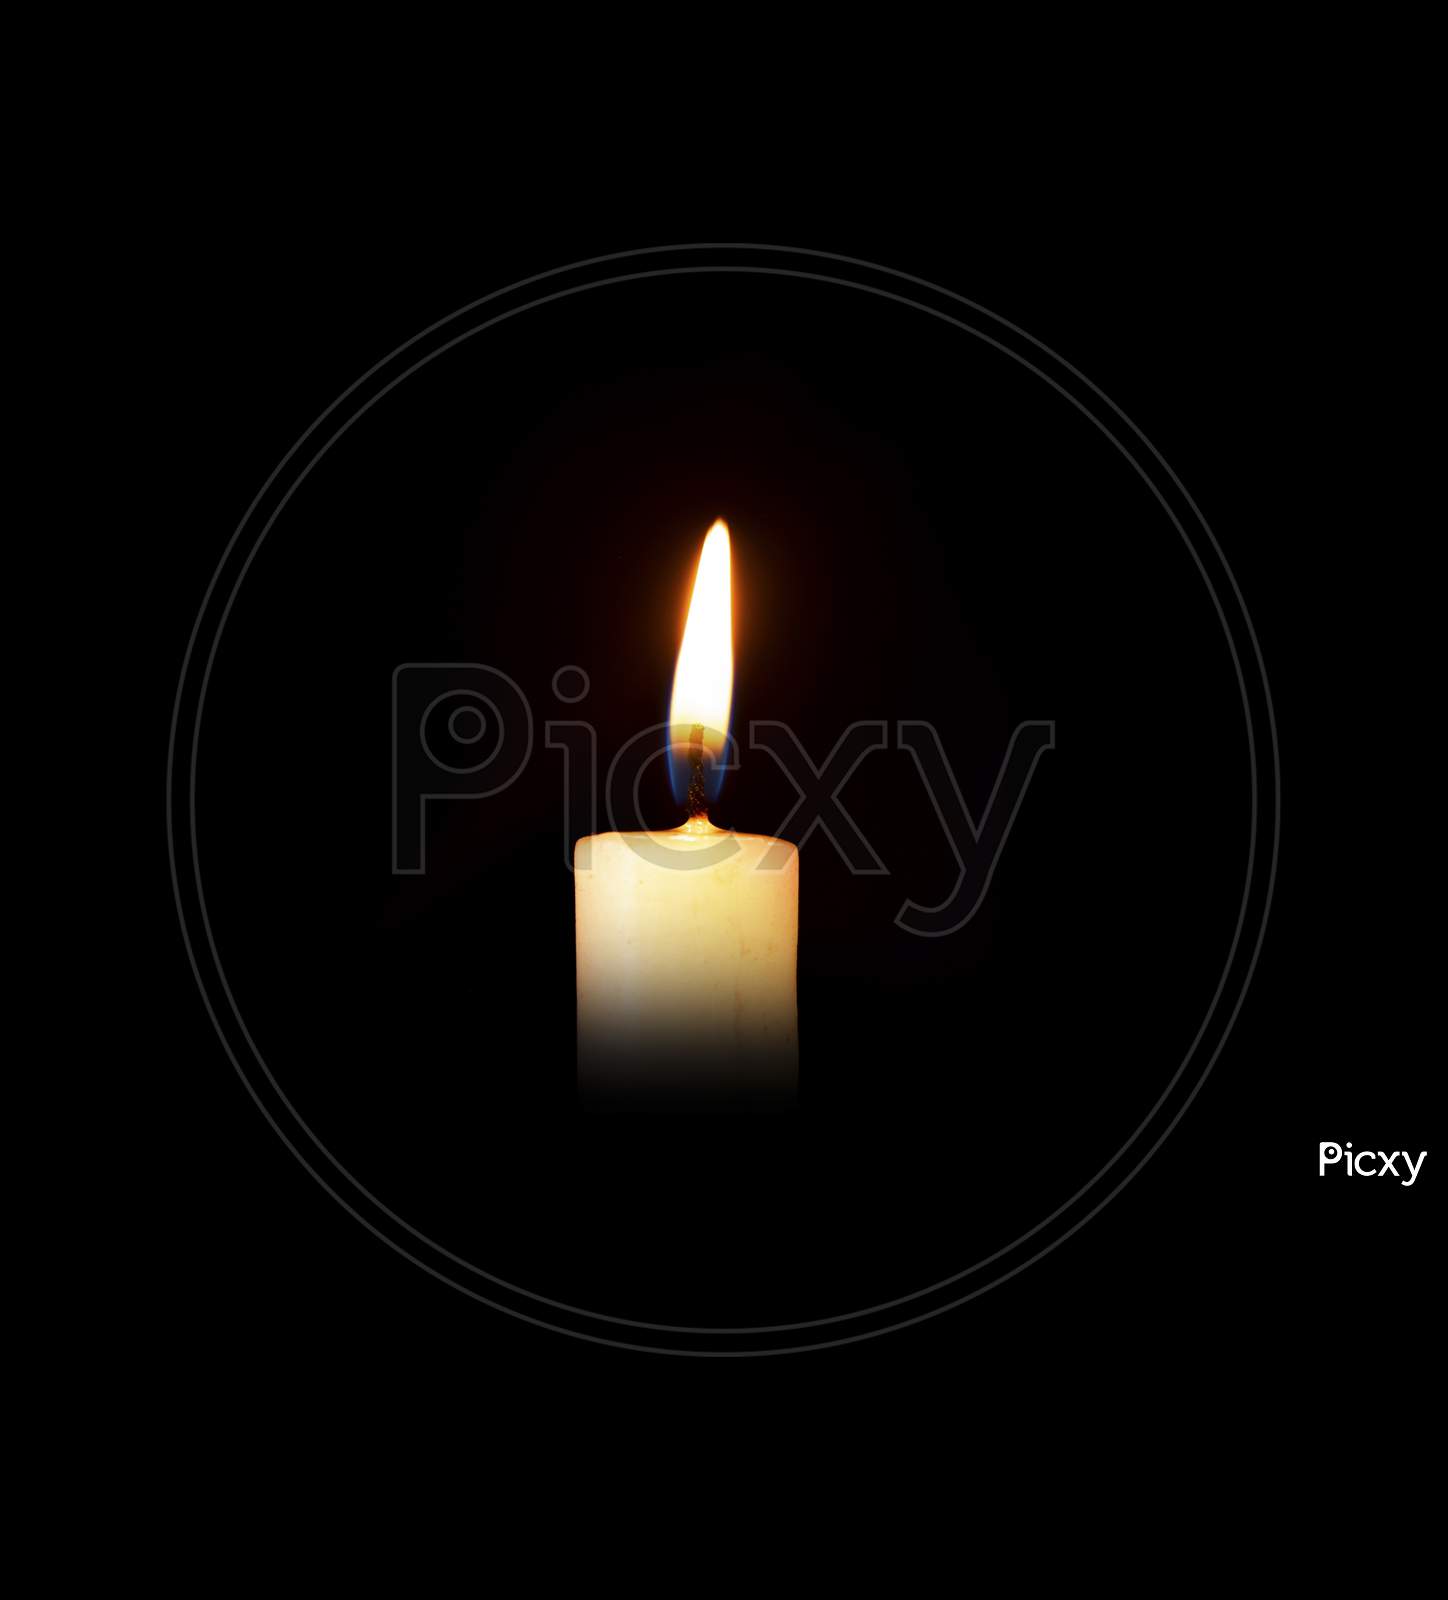 Single lit candle with quite flame